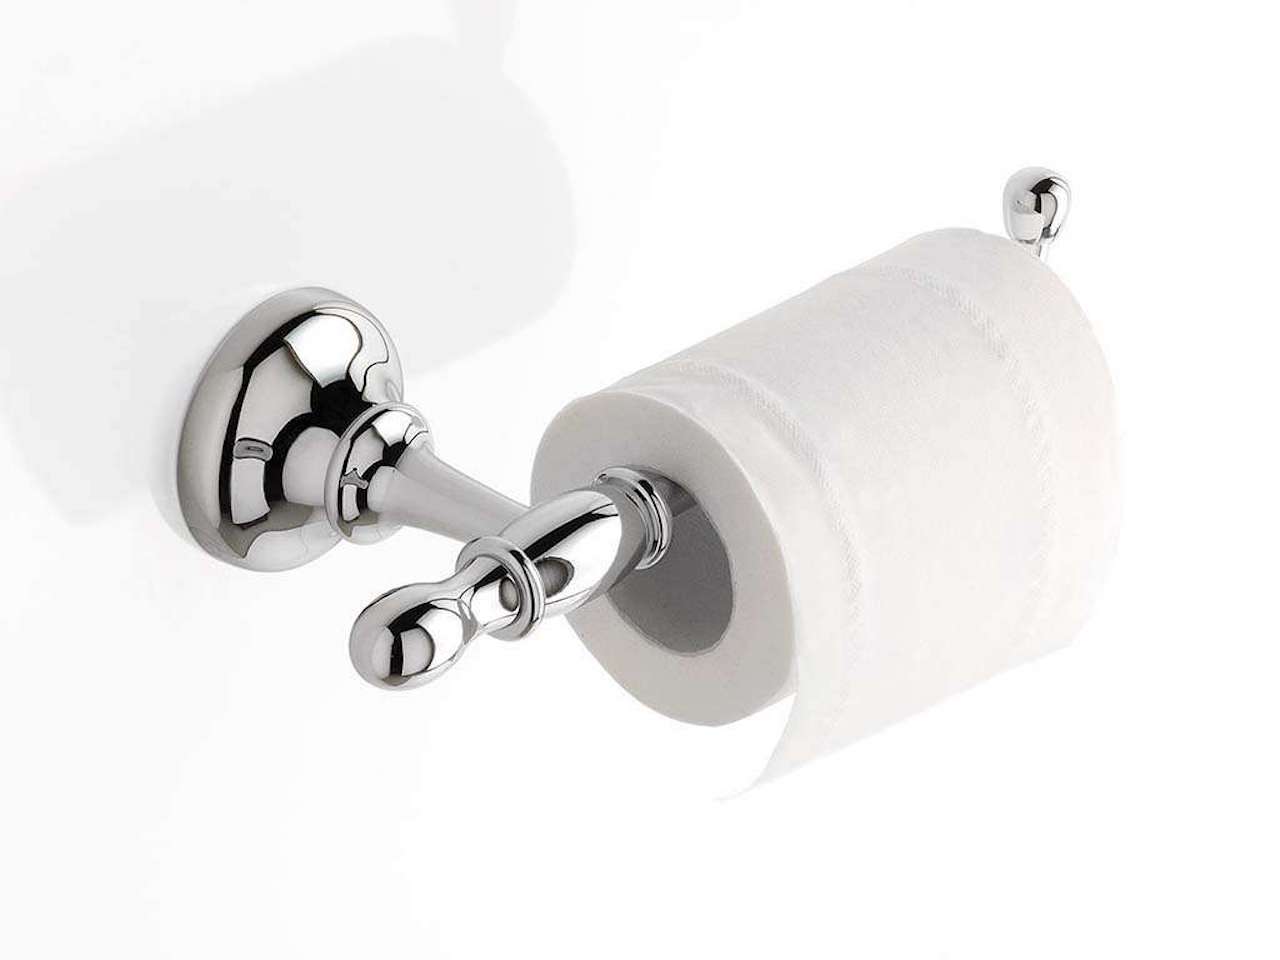 How To Fix Hole In Wall From Toilet Paper Holder